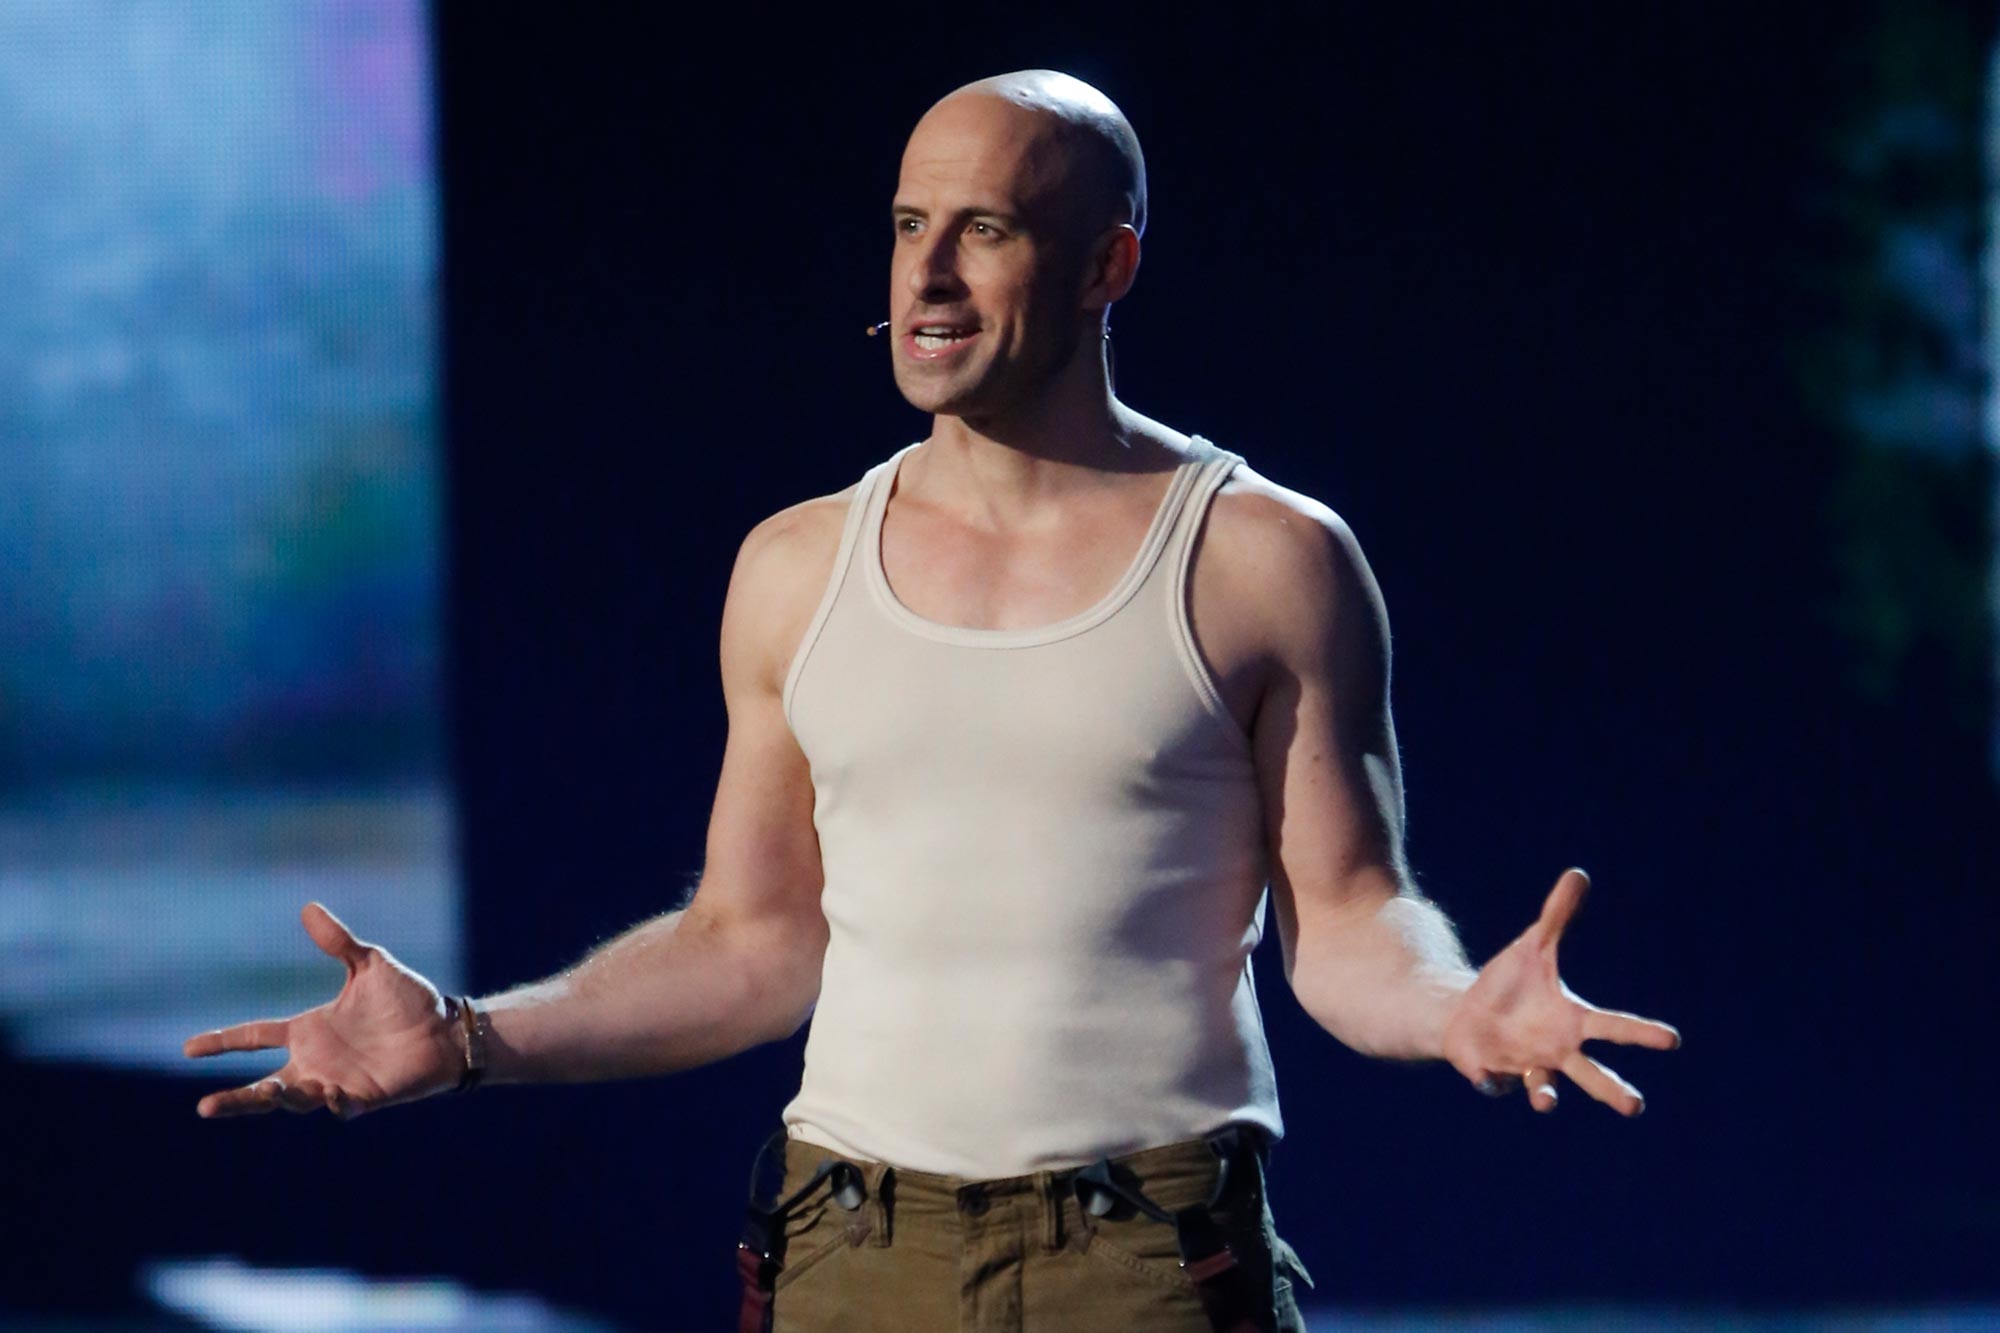 ‘AGT: Extreme’ Stunt Gone Wrong: Jonathan Goodwin Sues NBC Over Negligence